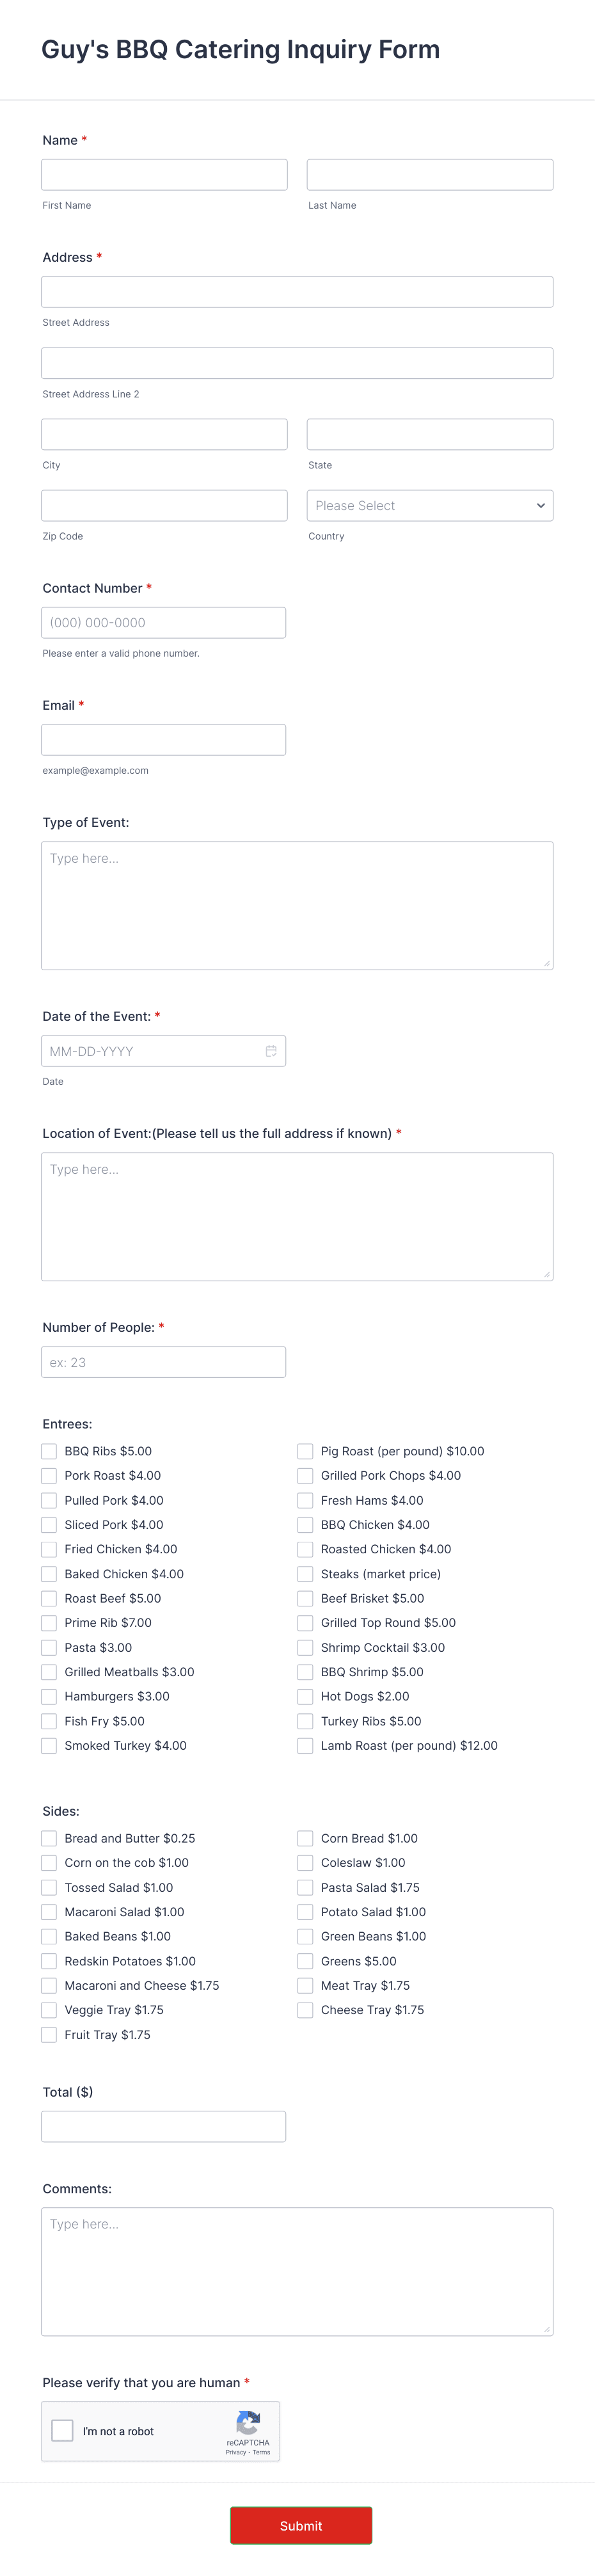 Guy's BBQ Catering Inquiry Form Template | Jotform